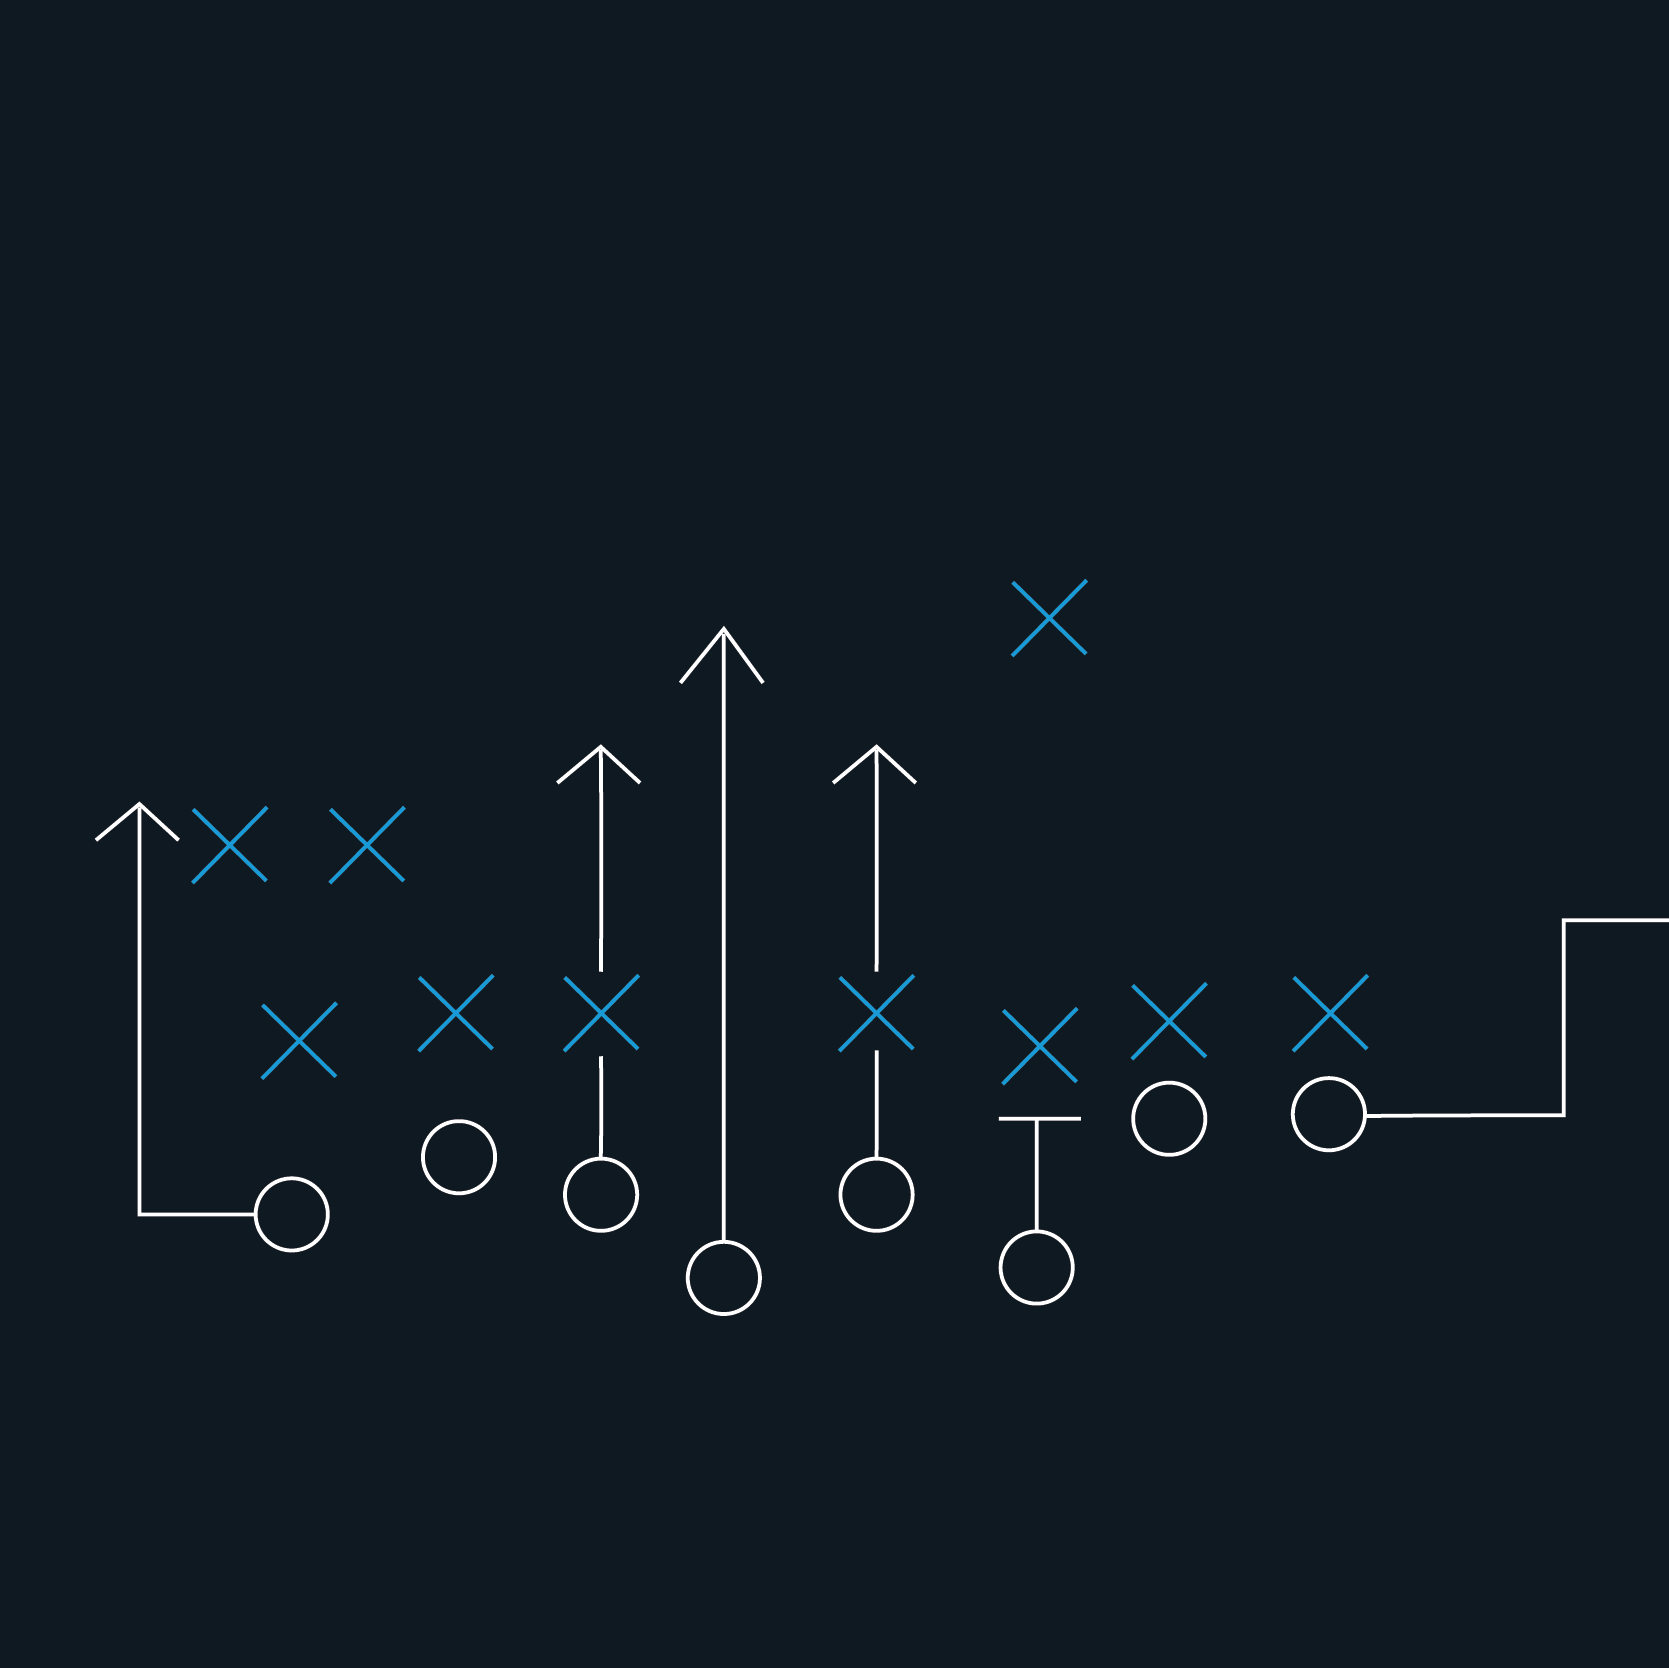 Blue Raven Solar Playbook preview featuring football plays on a dark blue background